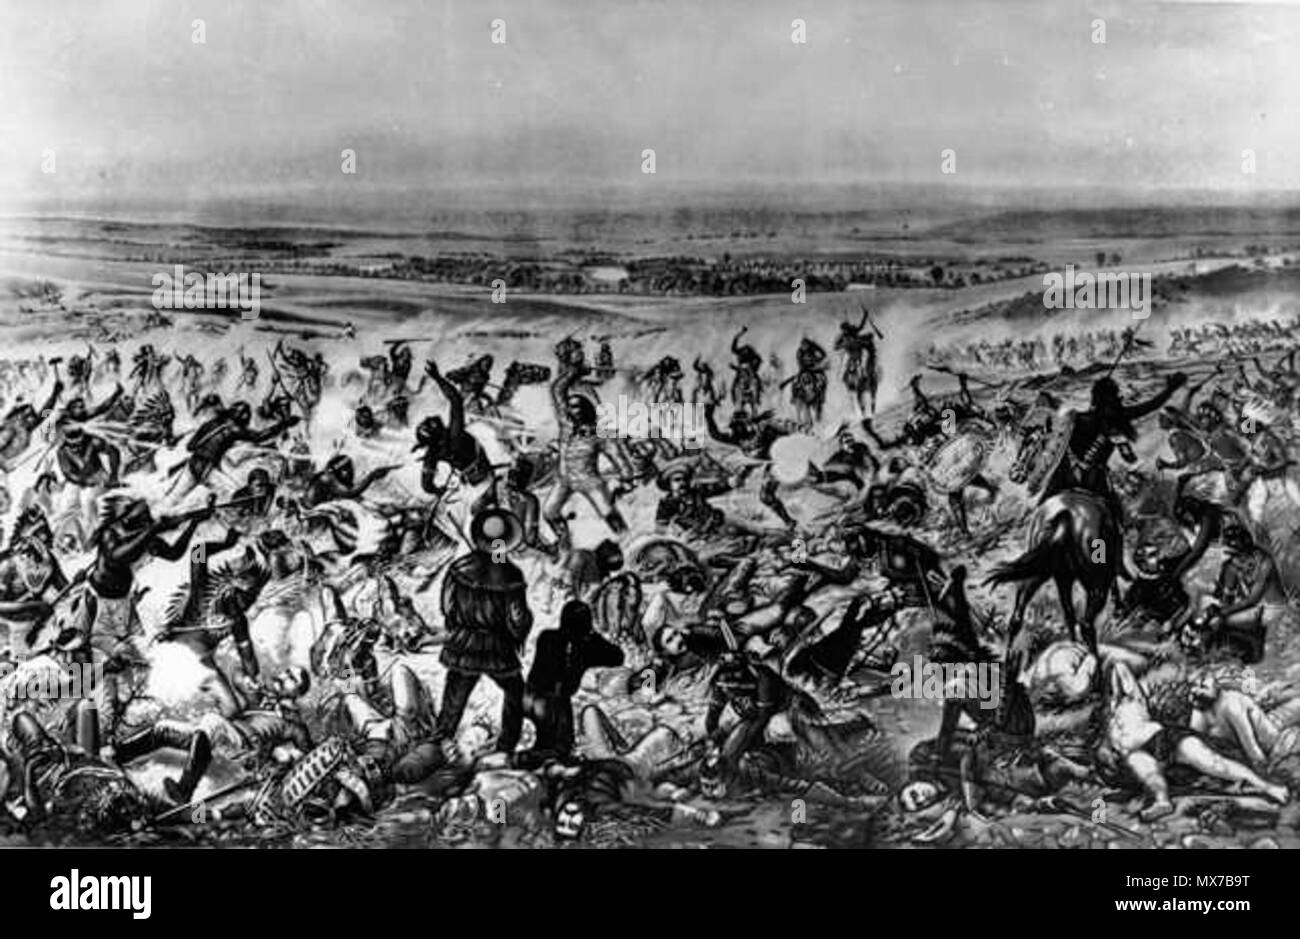 . Title: Custer's last stand Caption: Native American Lakota Sioux, Crow, Northern, and Cheyenne, defeat General Custer standing center, wearing buckskin, with few of his soldiers of the Seventh Cavalry still standing, Little Bighorn Battlefield, June 26, 1876 Little Bighorn River, Montana. Template:Denver Public Library public domain images . User Lordkinbote on en.wikipedia 149 Custer's last stand painting Stock Photo